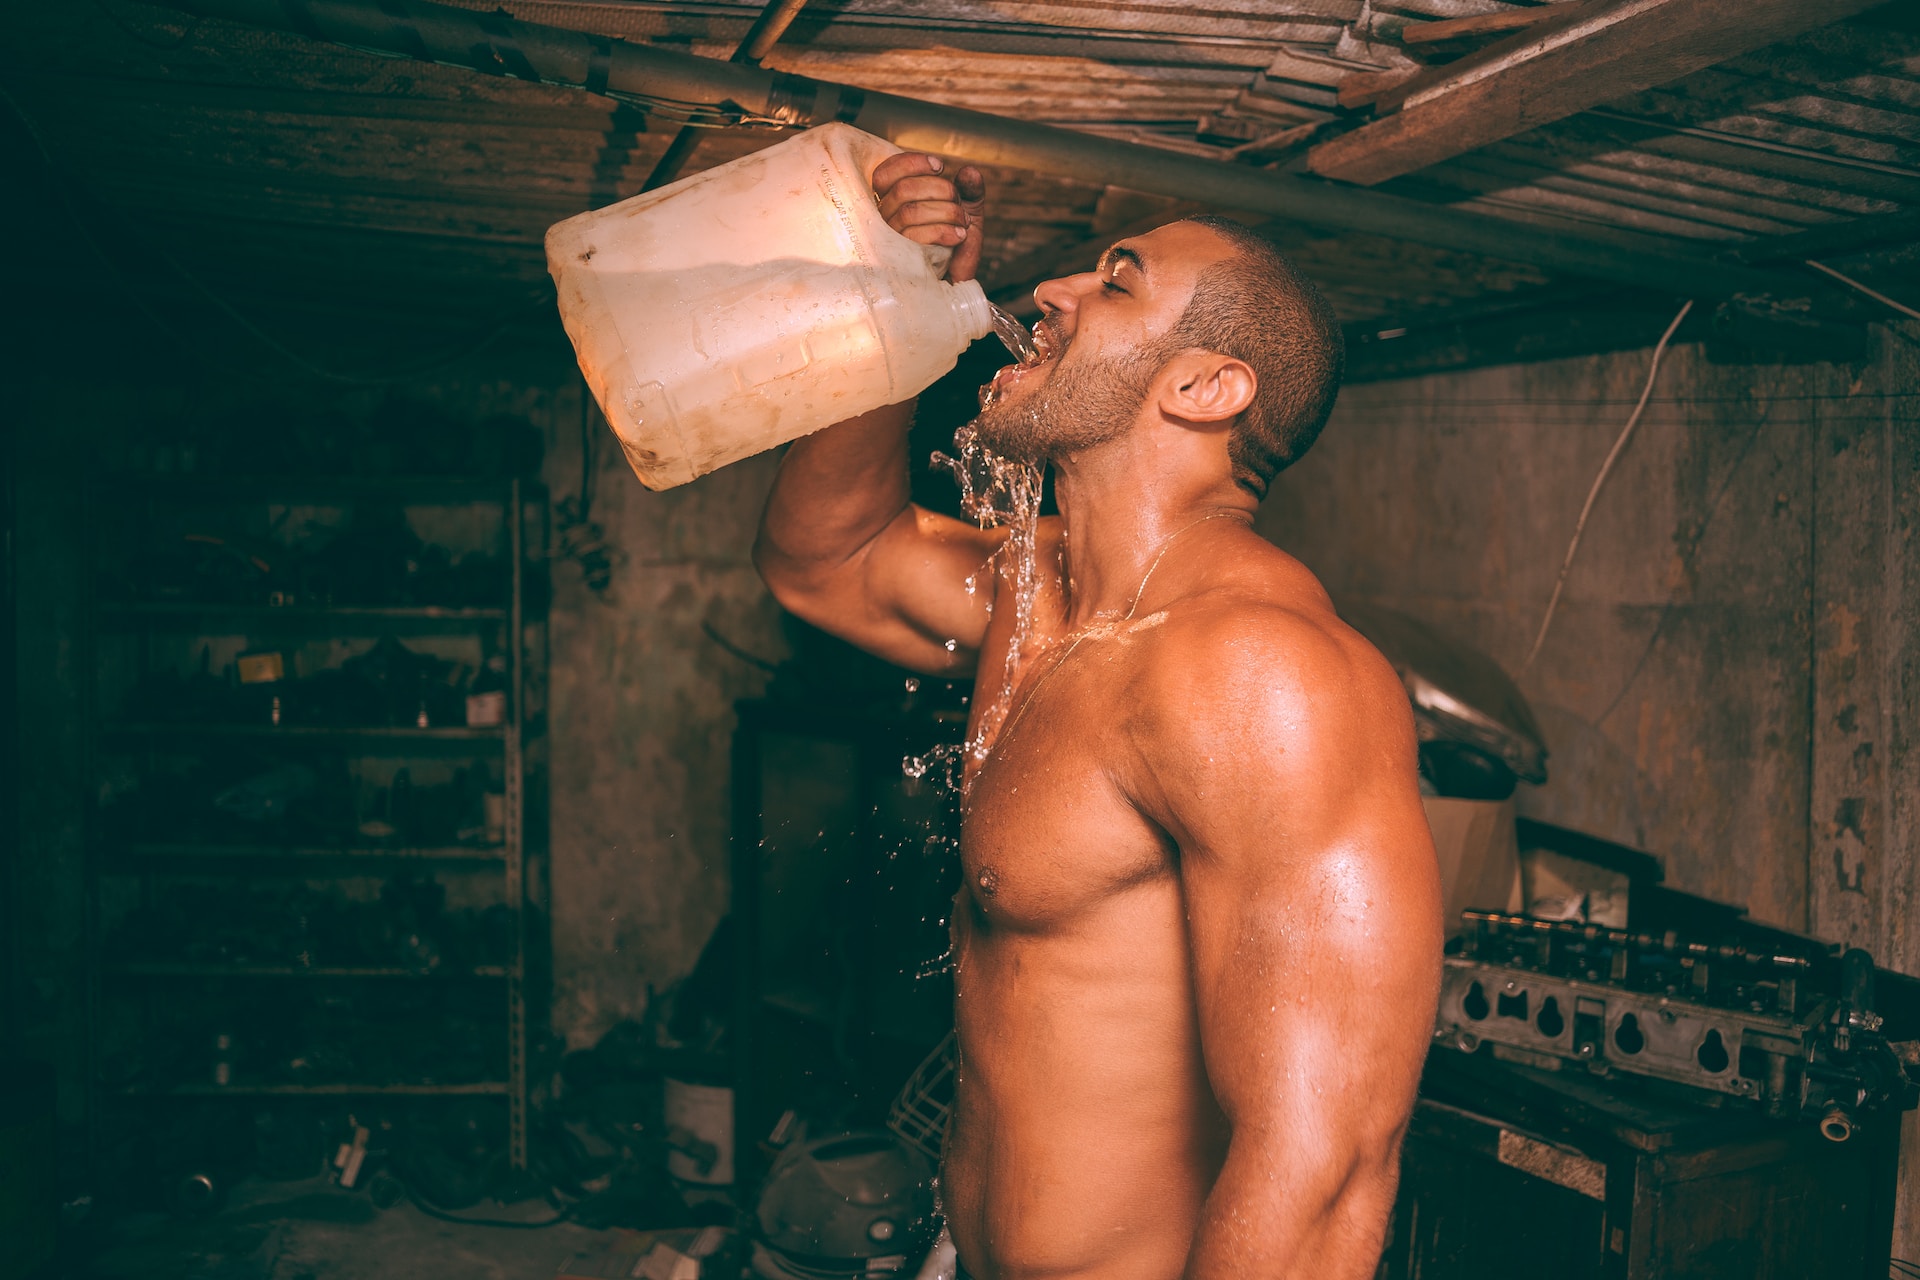 Fitness guy drinking lots of water to stay hydrated when working out